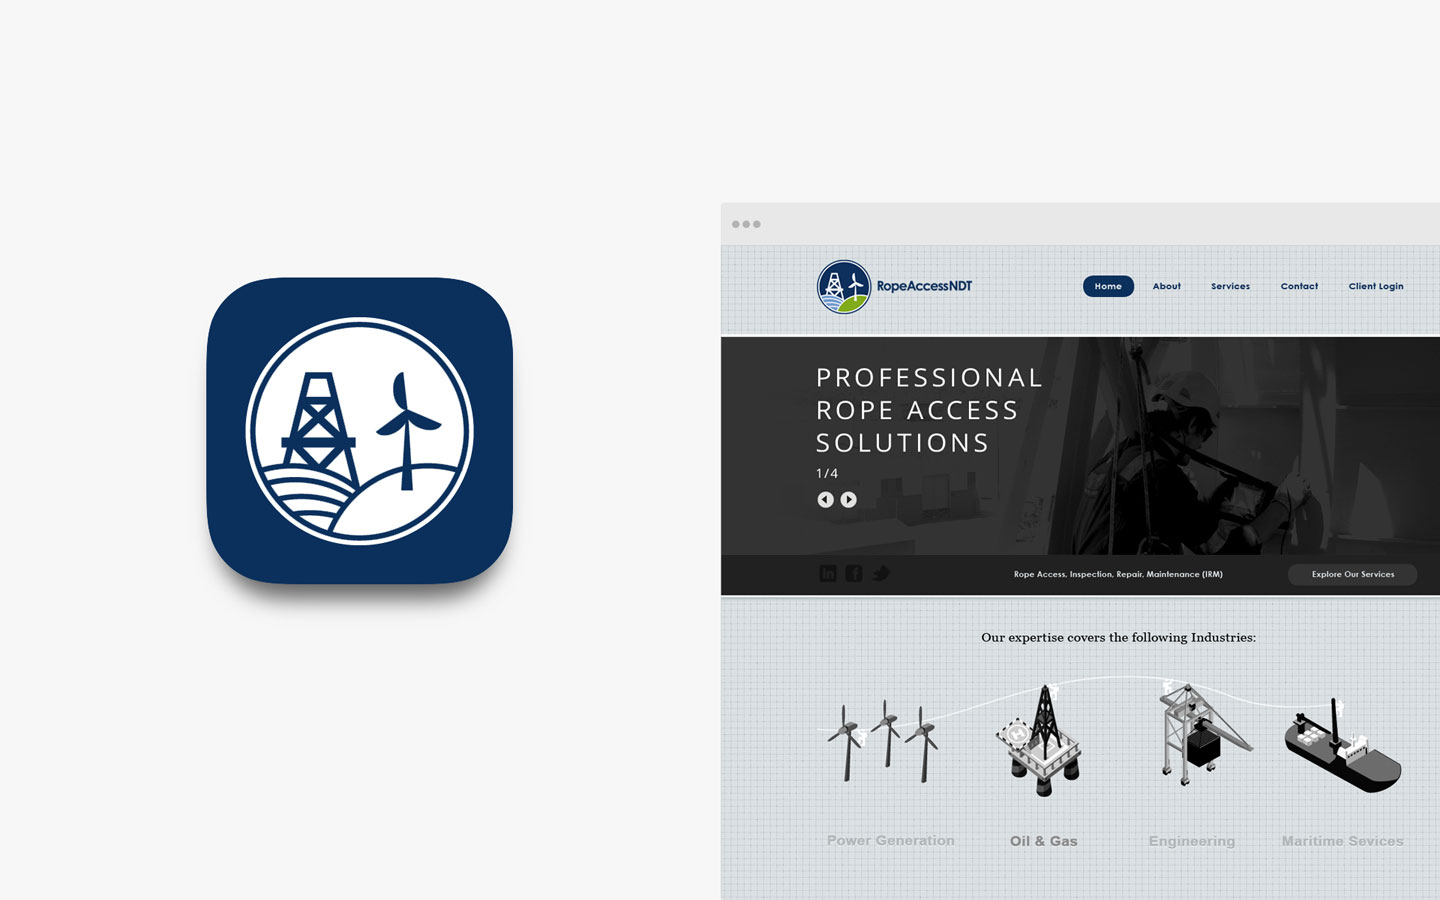 Rope Access NDT, Logo Design in IOS Icon and Website